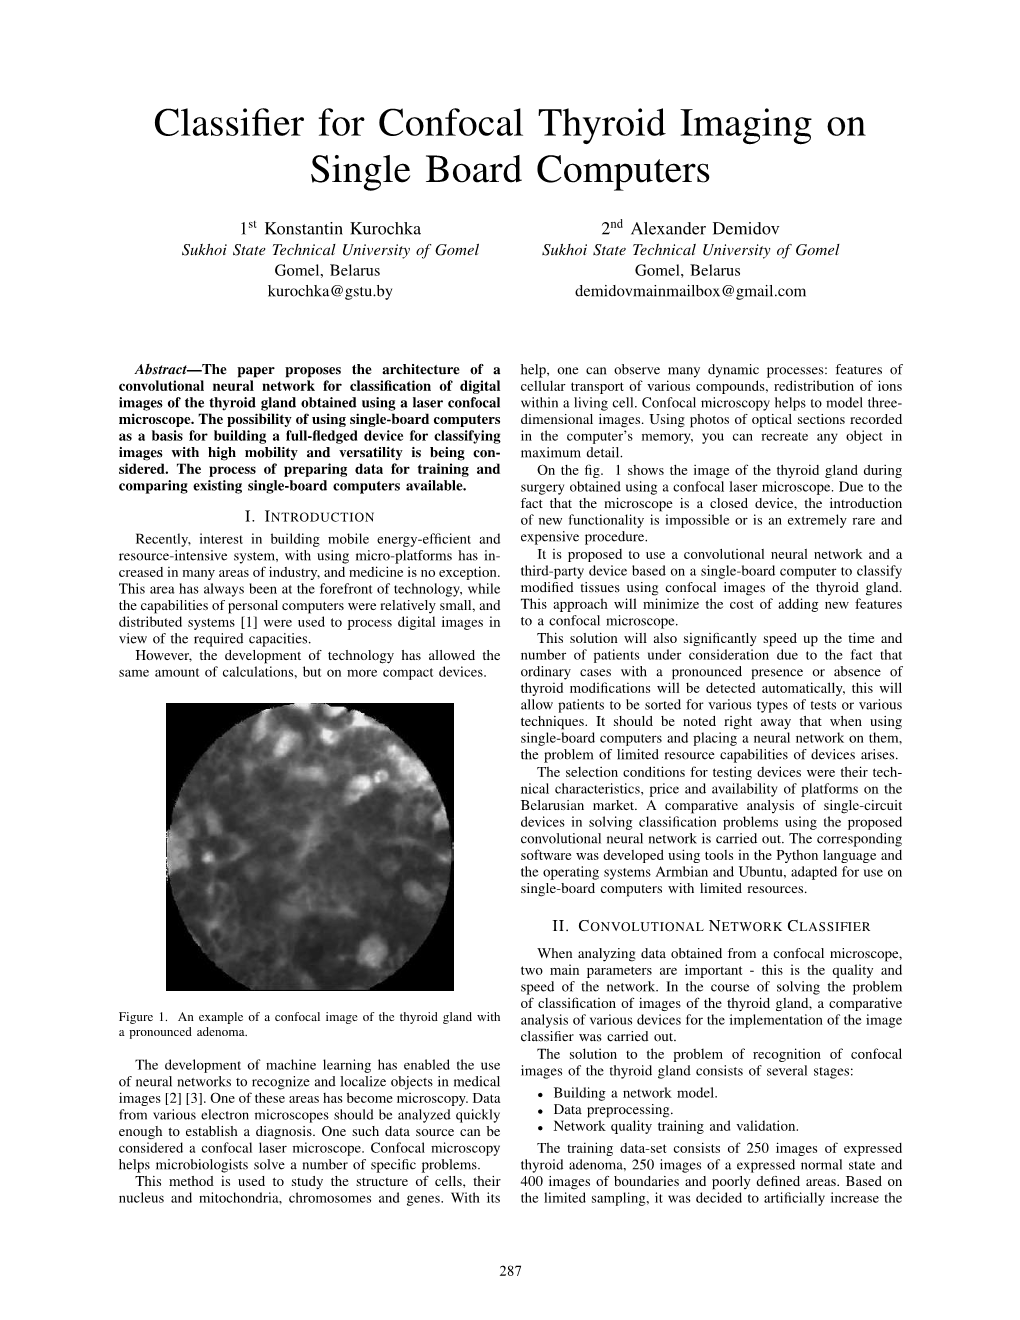 Classifier for Confocal Thyroid Imaging on Single Board Computers